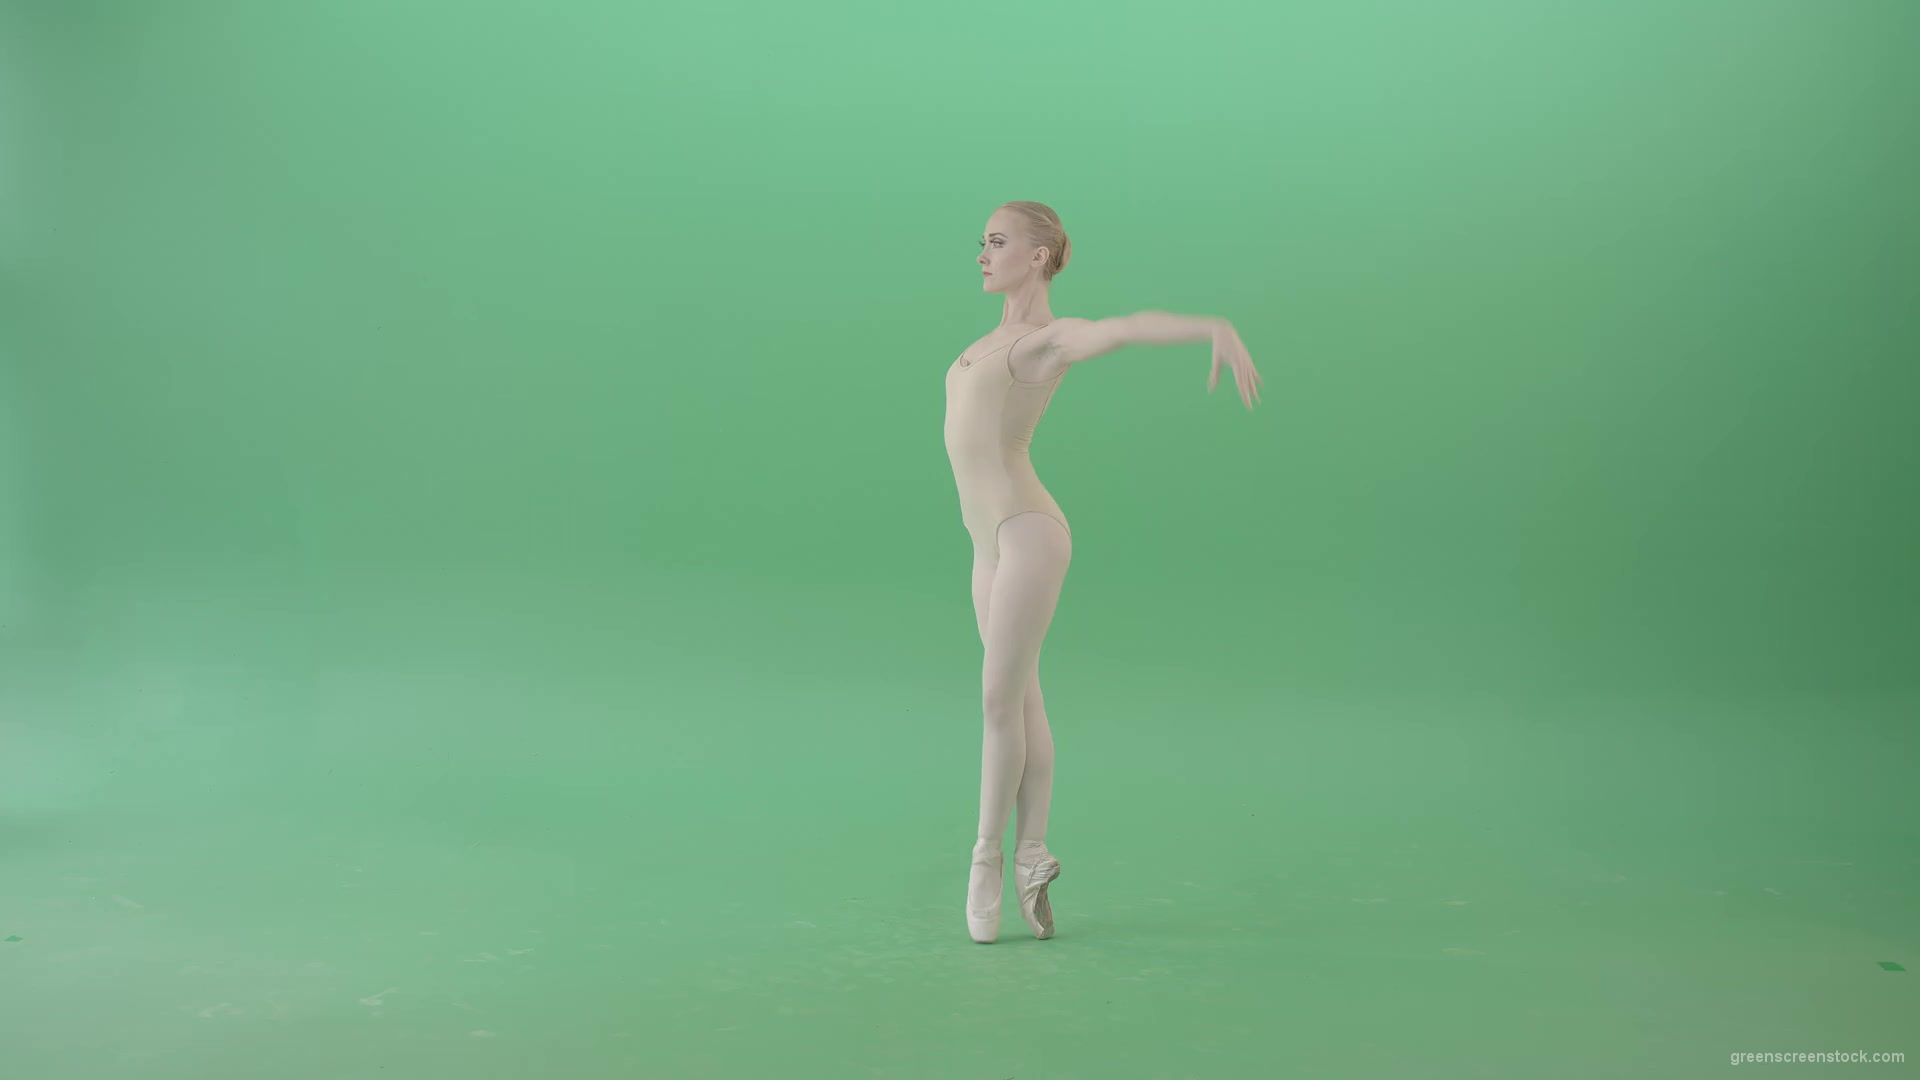 Classical-Ballet-Art-dancing-girl-in-body-skin-wear-chill-in-practice-isolated-on-green-screen-4K-Video-Footage-1920_007 Green Screen Stock